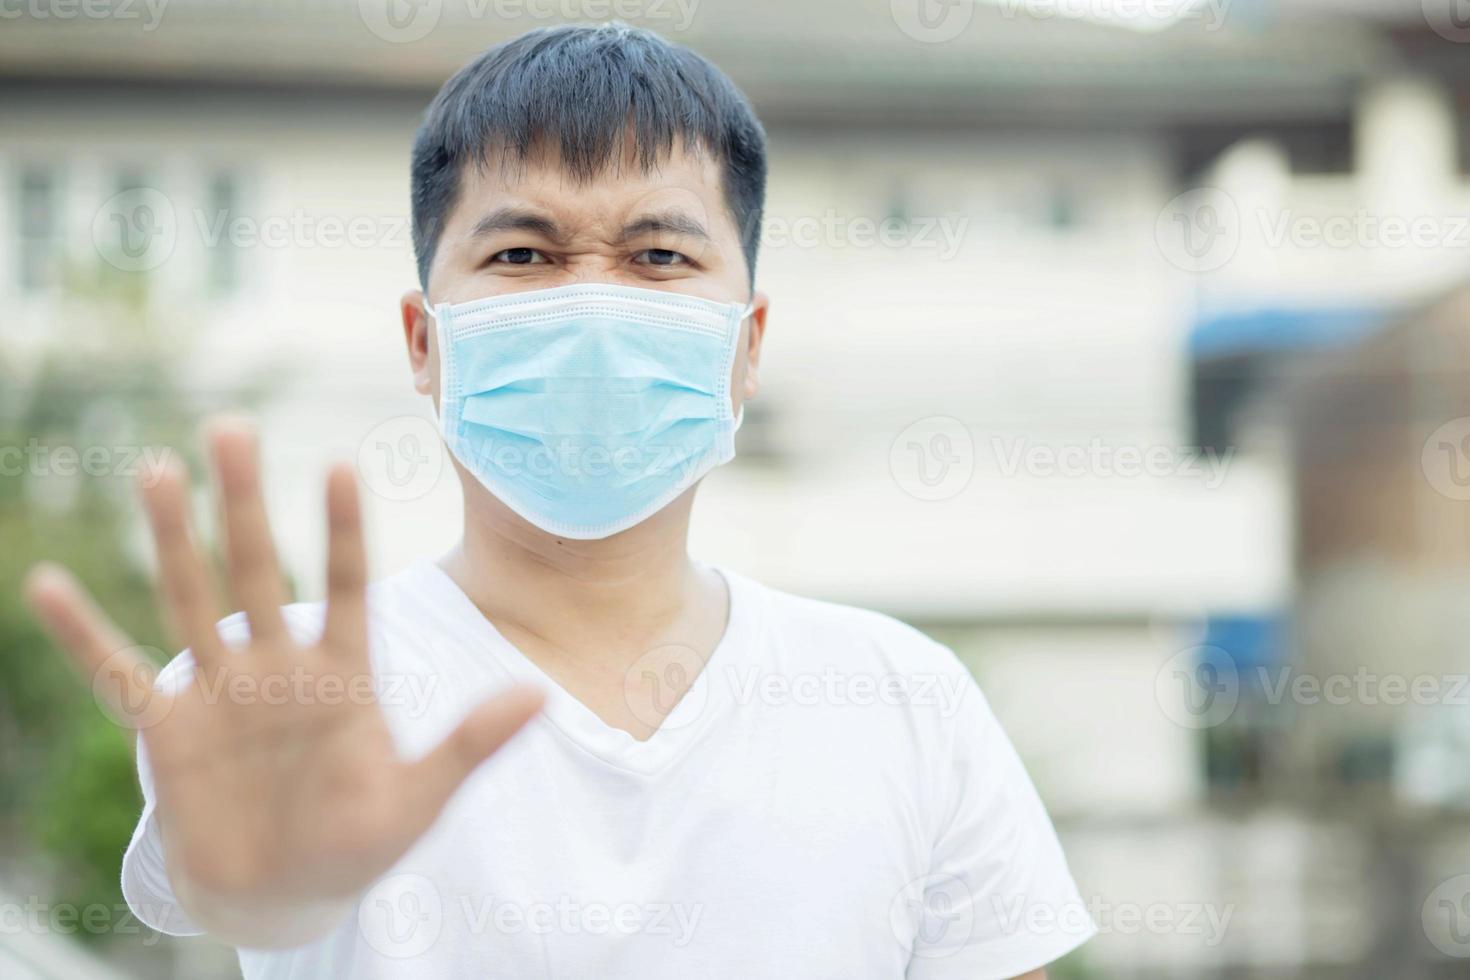 This man protected himself from the virus. photo